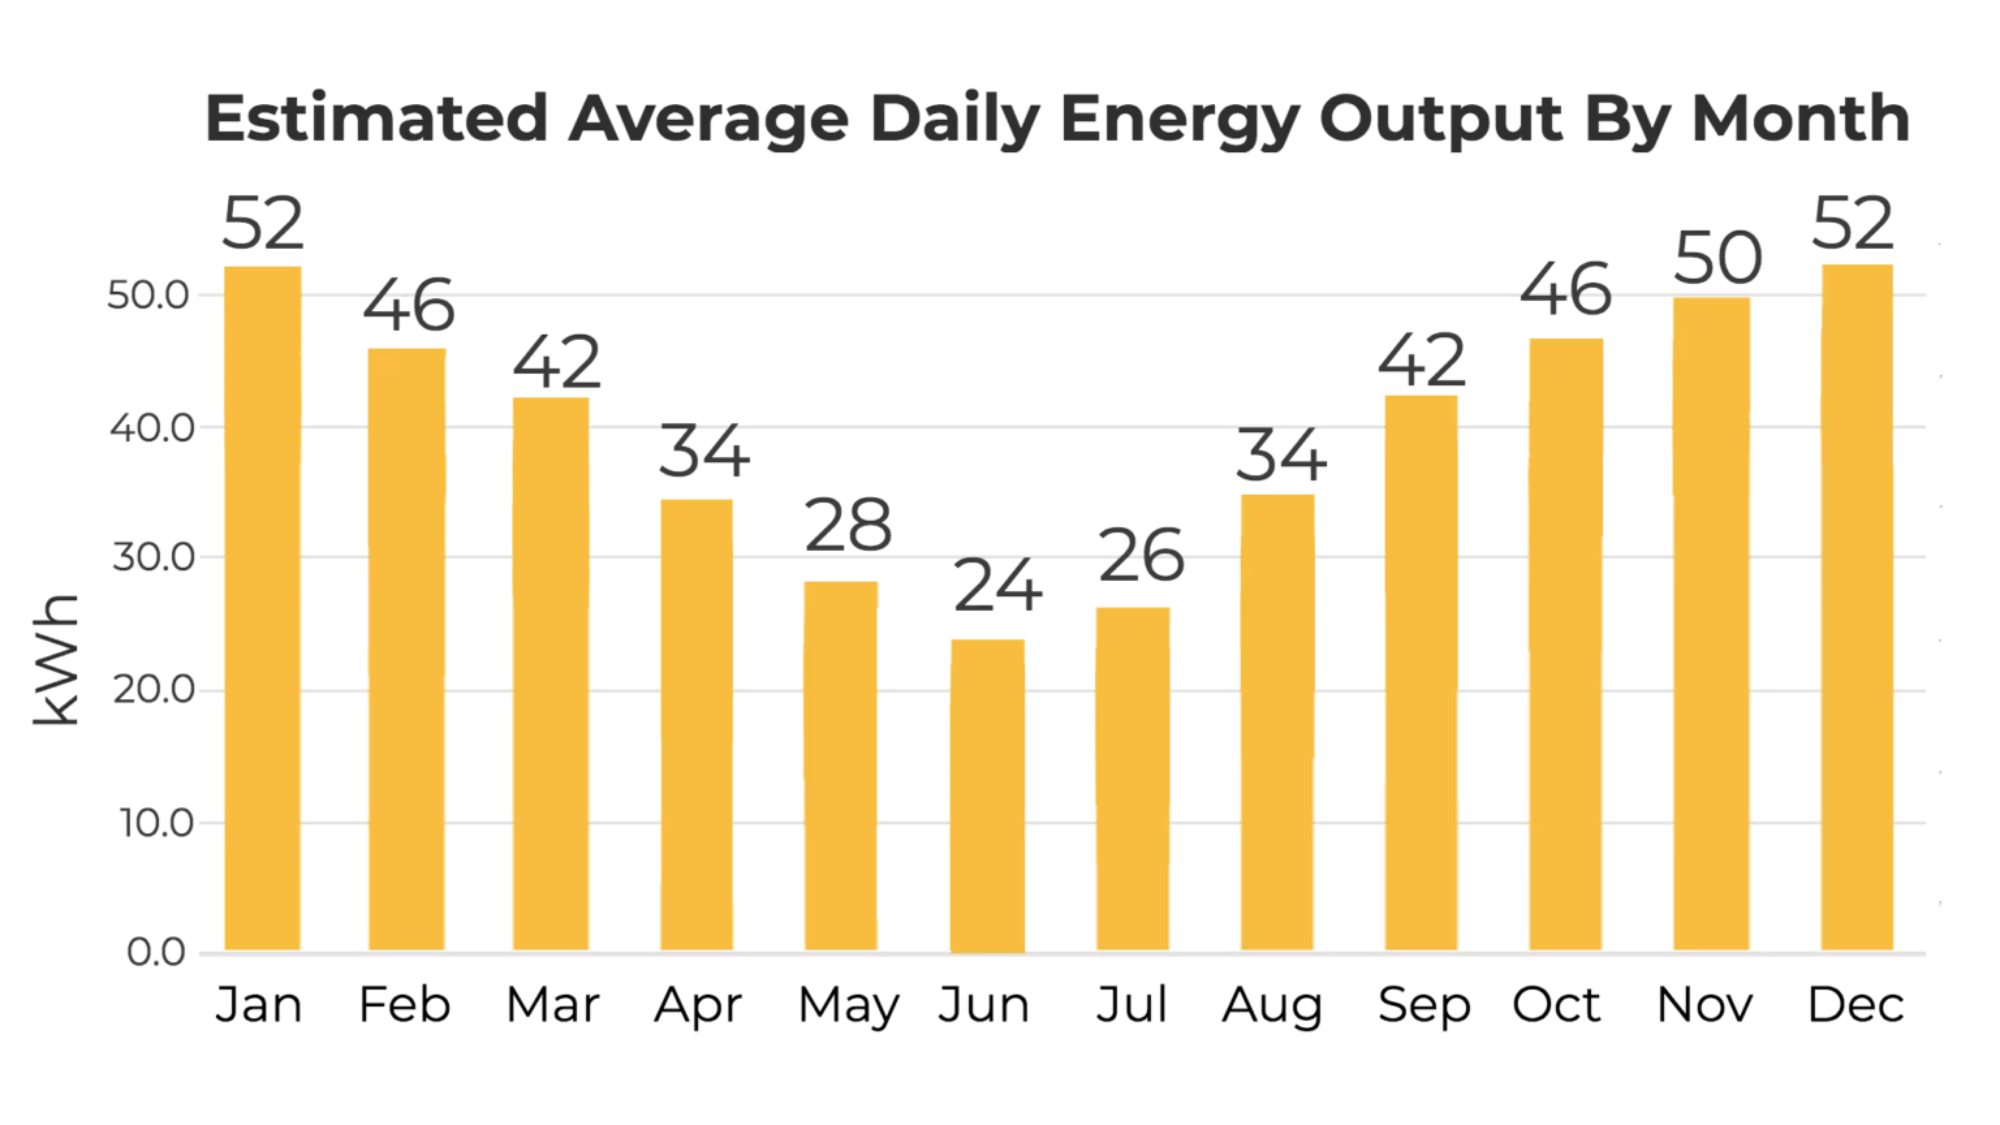 Estimated Average Daily Energy Output by Month